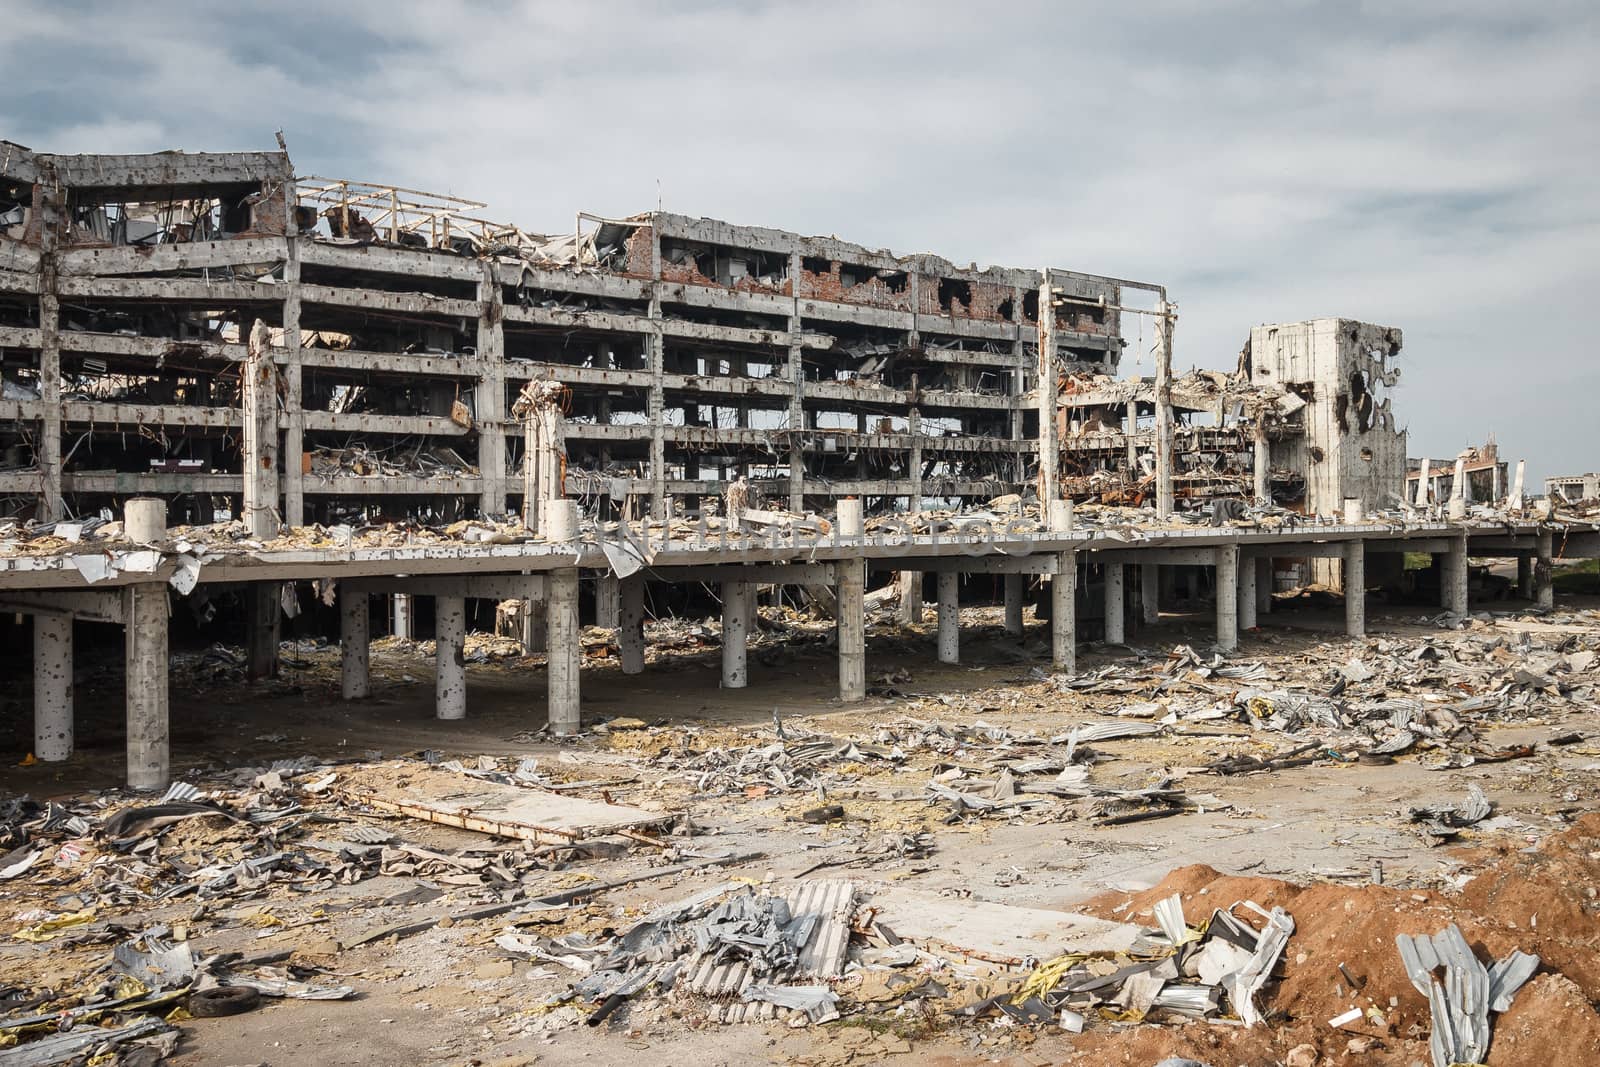 Wide angle view of donetsk airport ruins by mrakor